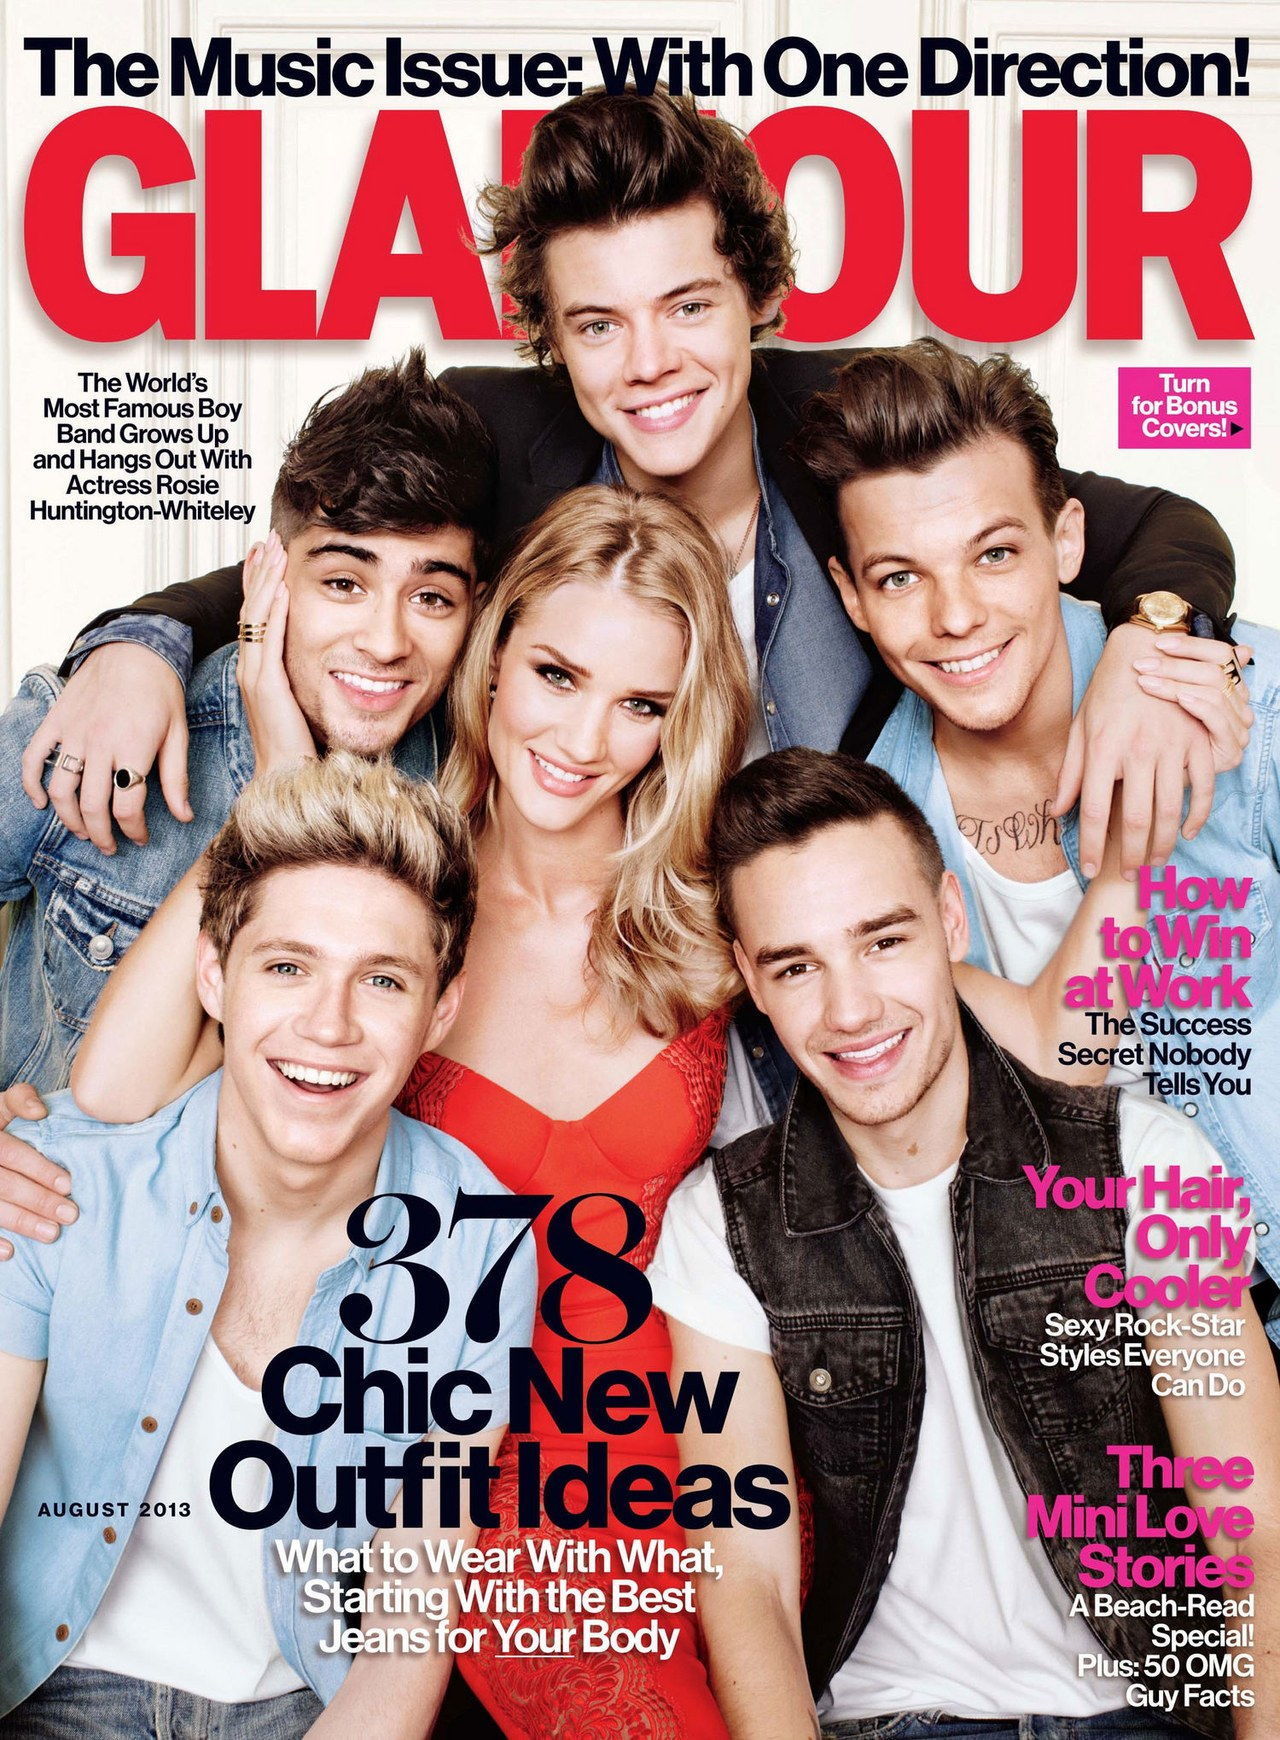 Uno Direction and Rosie Huntington-Whiteley's *Glamour* August Issue Photo-Shoot